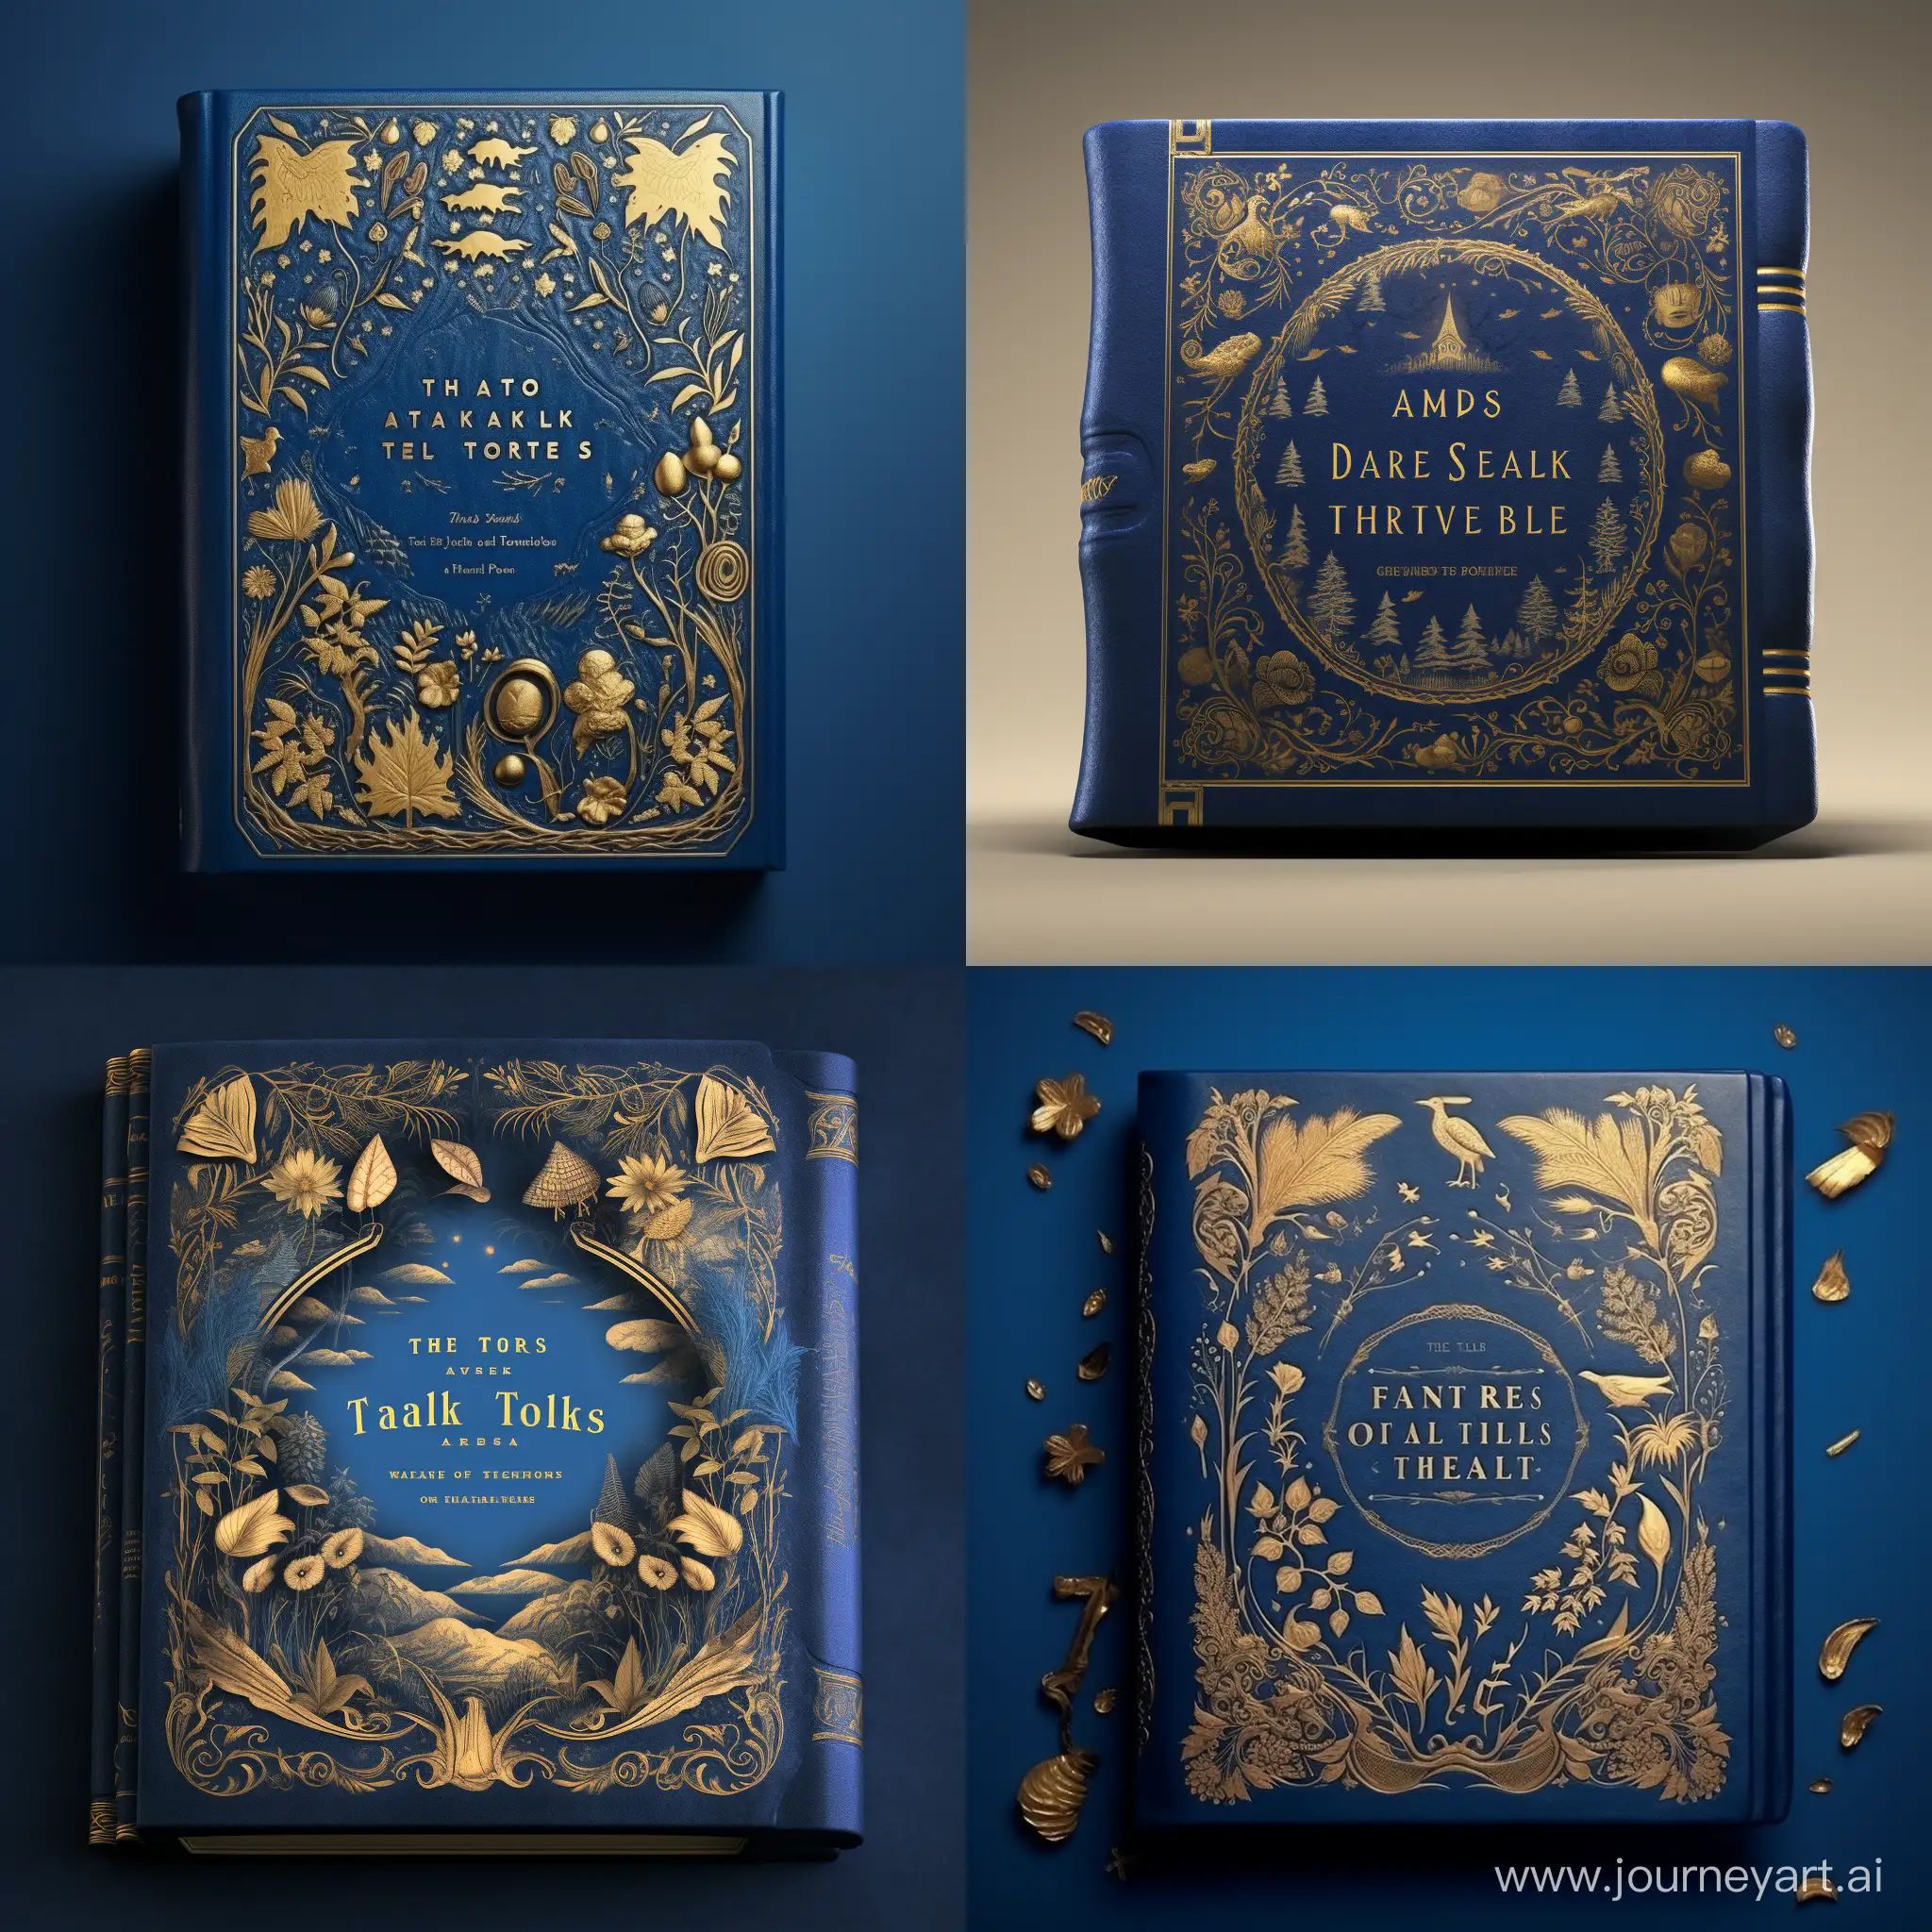 draw a magic book of fairy tales, a worn bright blue leather cover with gold lettering, in the middle the inscription "Fairy Tales" and a landscape of a winter forest, on the edges of the book golden plant and animal patterns
